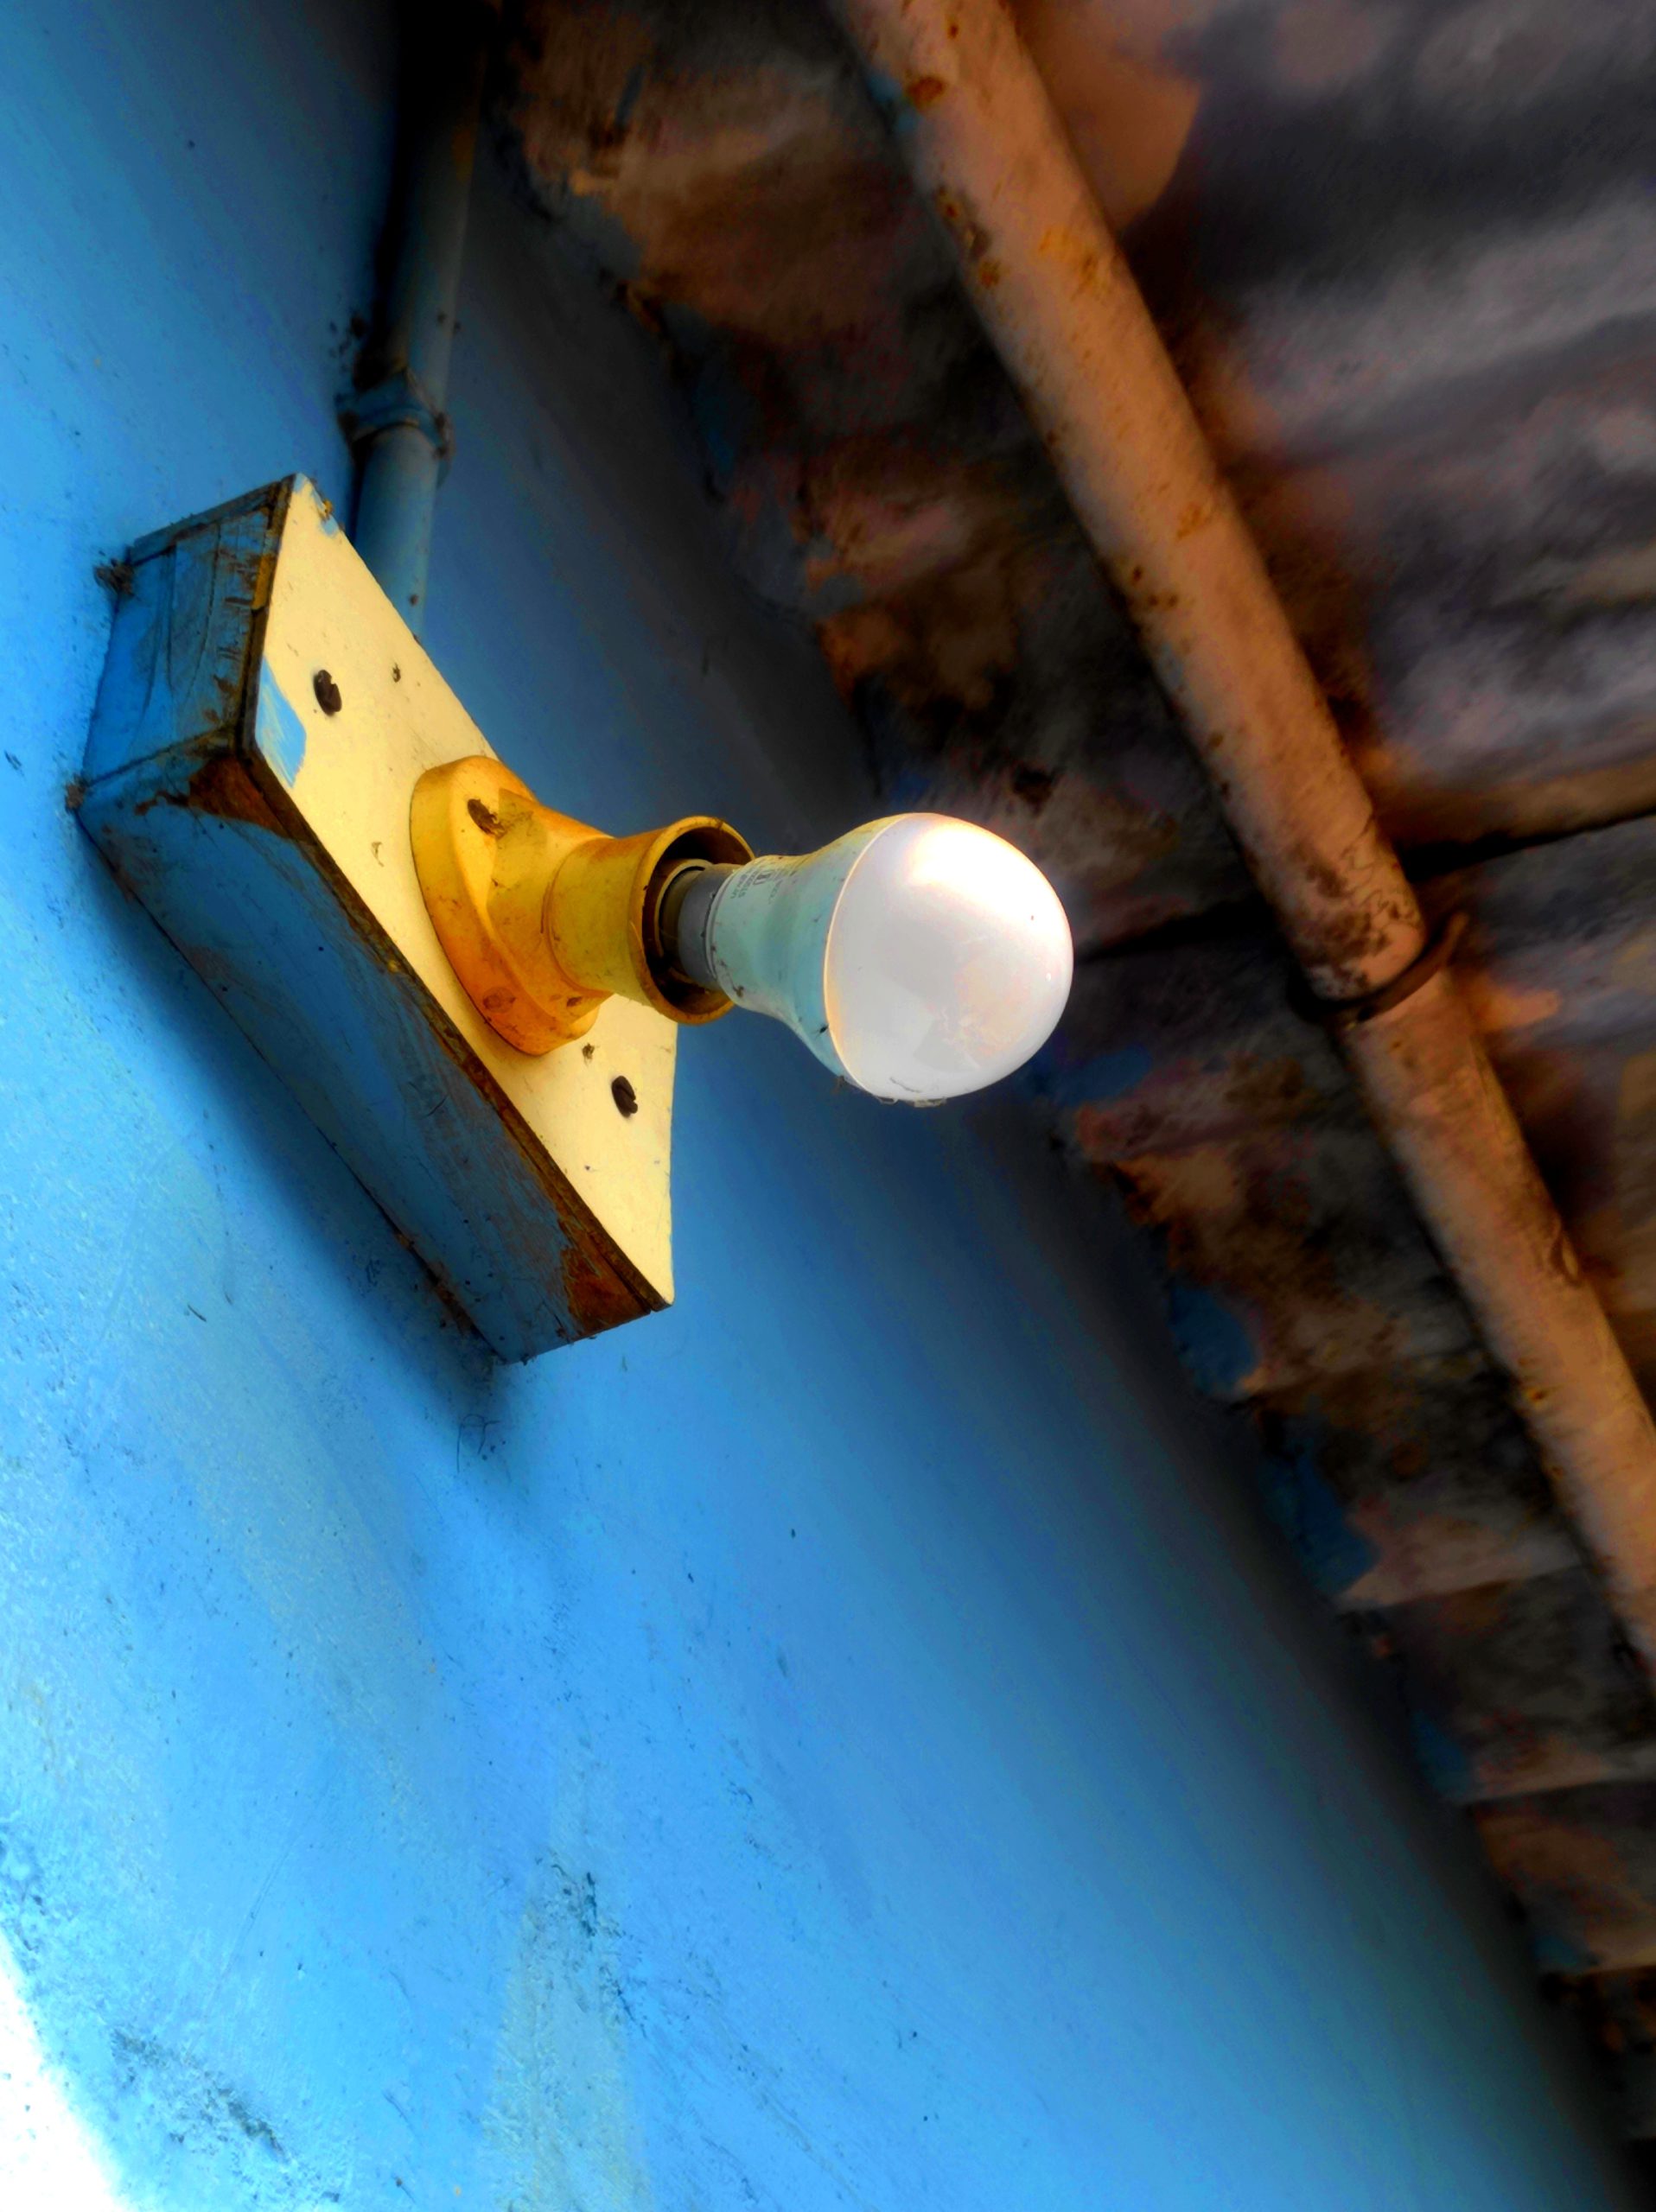 An LED light bulb Emmanuel installed in his home last year. Photo contributed by Emmanuel Mahendra.